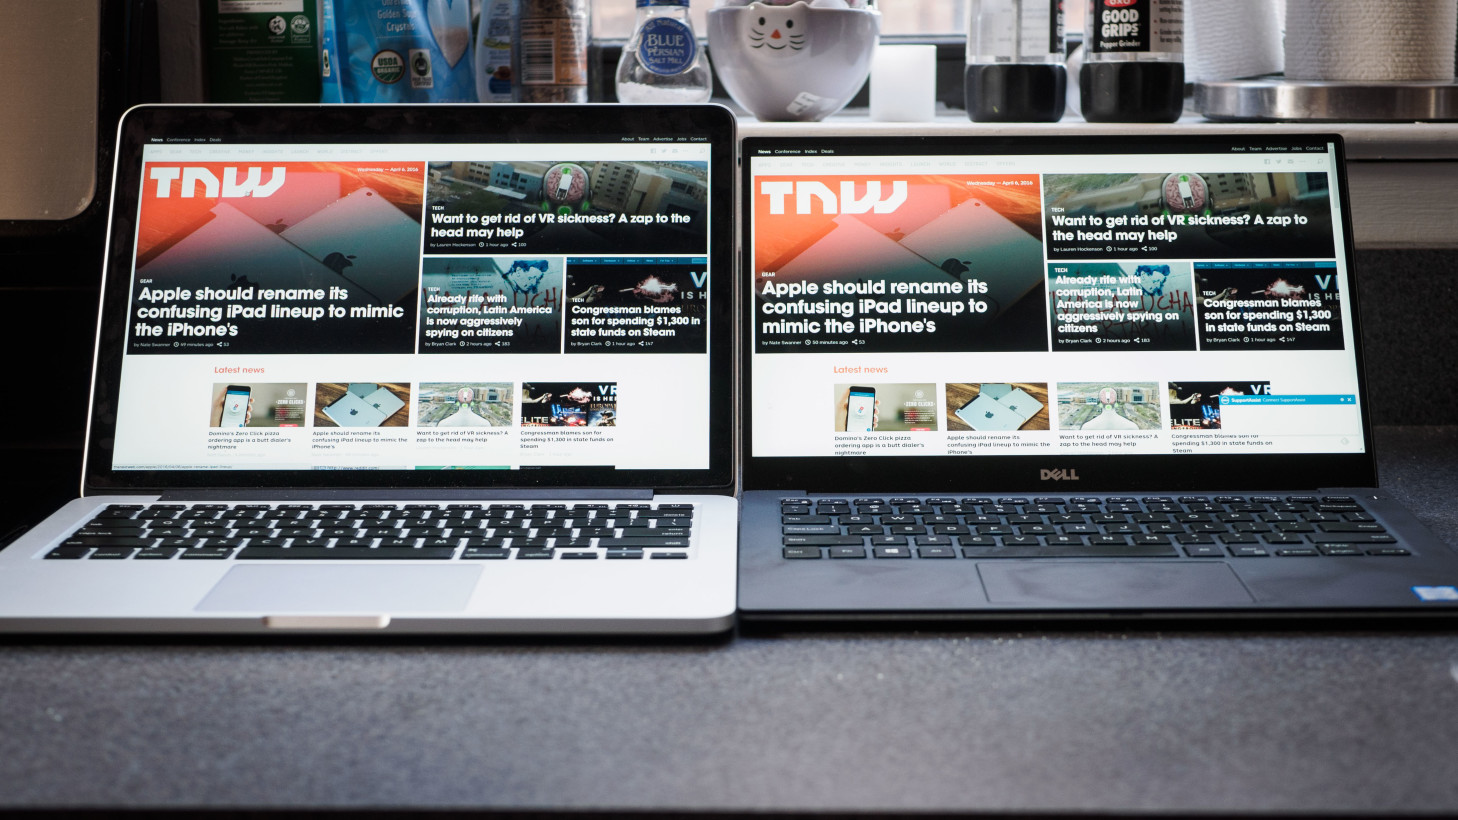 The XPS 13 and MacBook Pro both have 13 inch displays, but the Dell is much smaller.